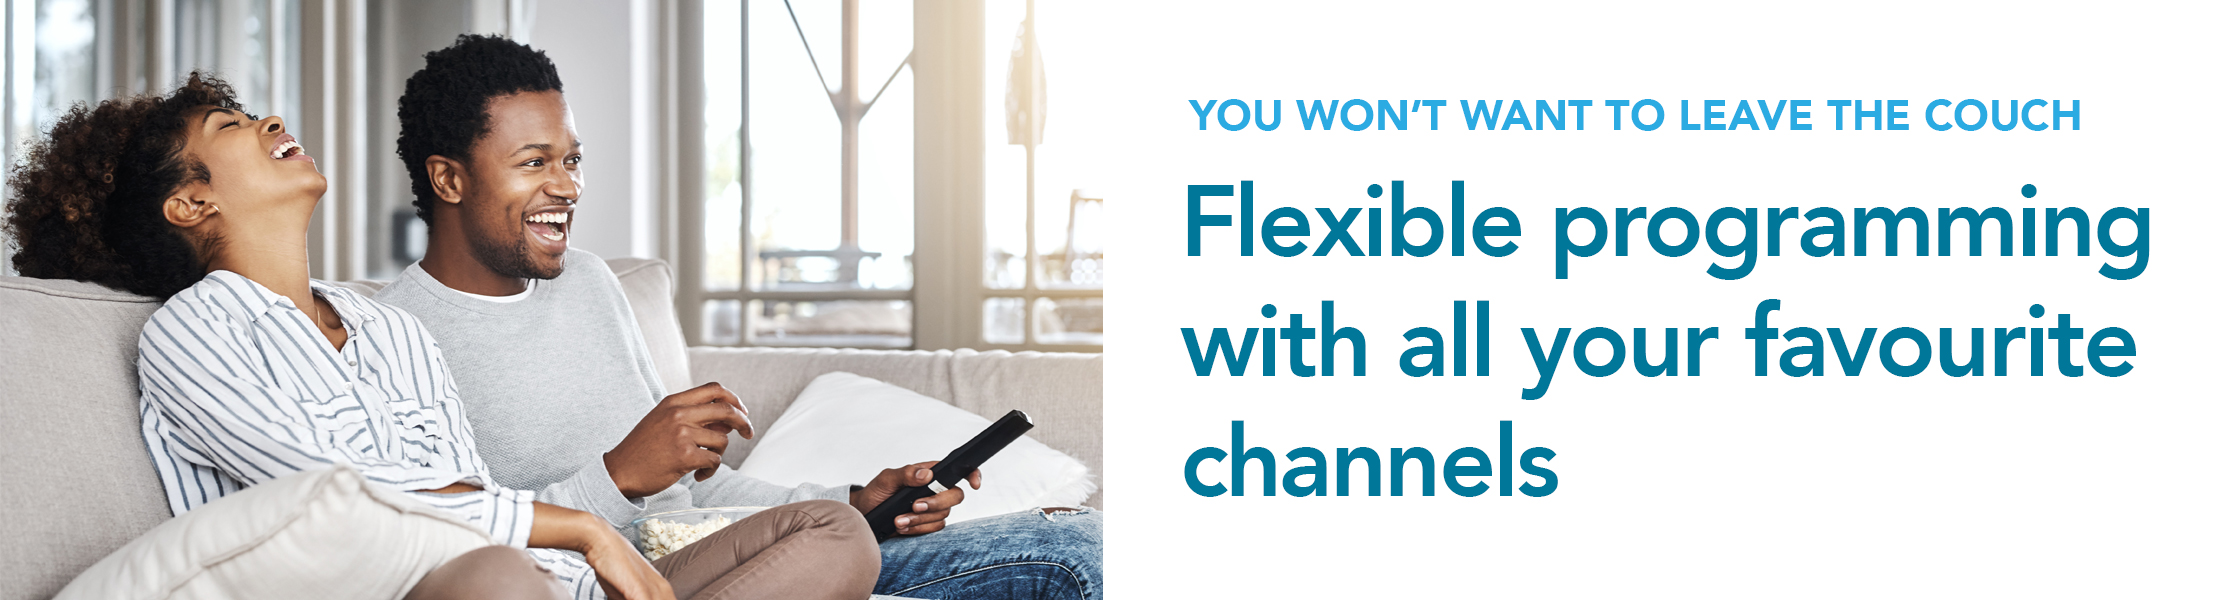 Flexible programming with all your favourite channels